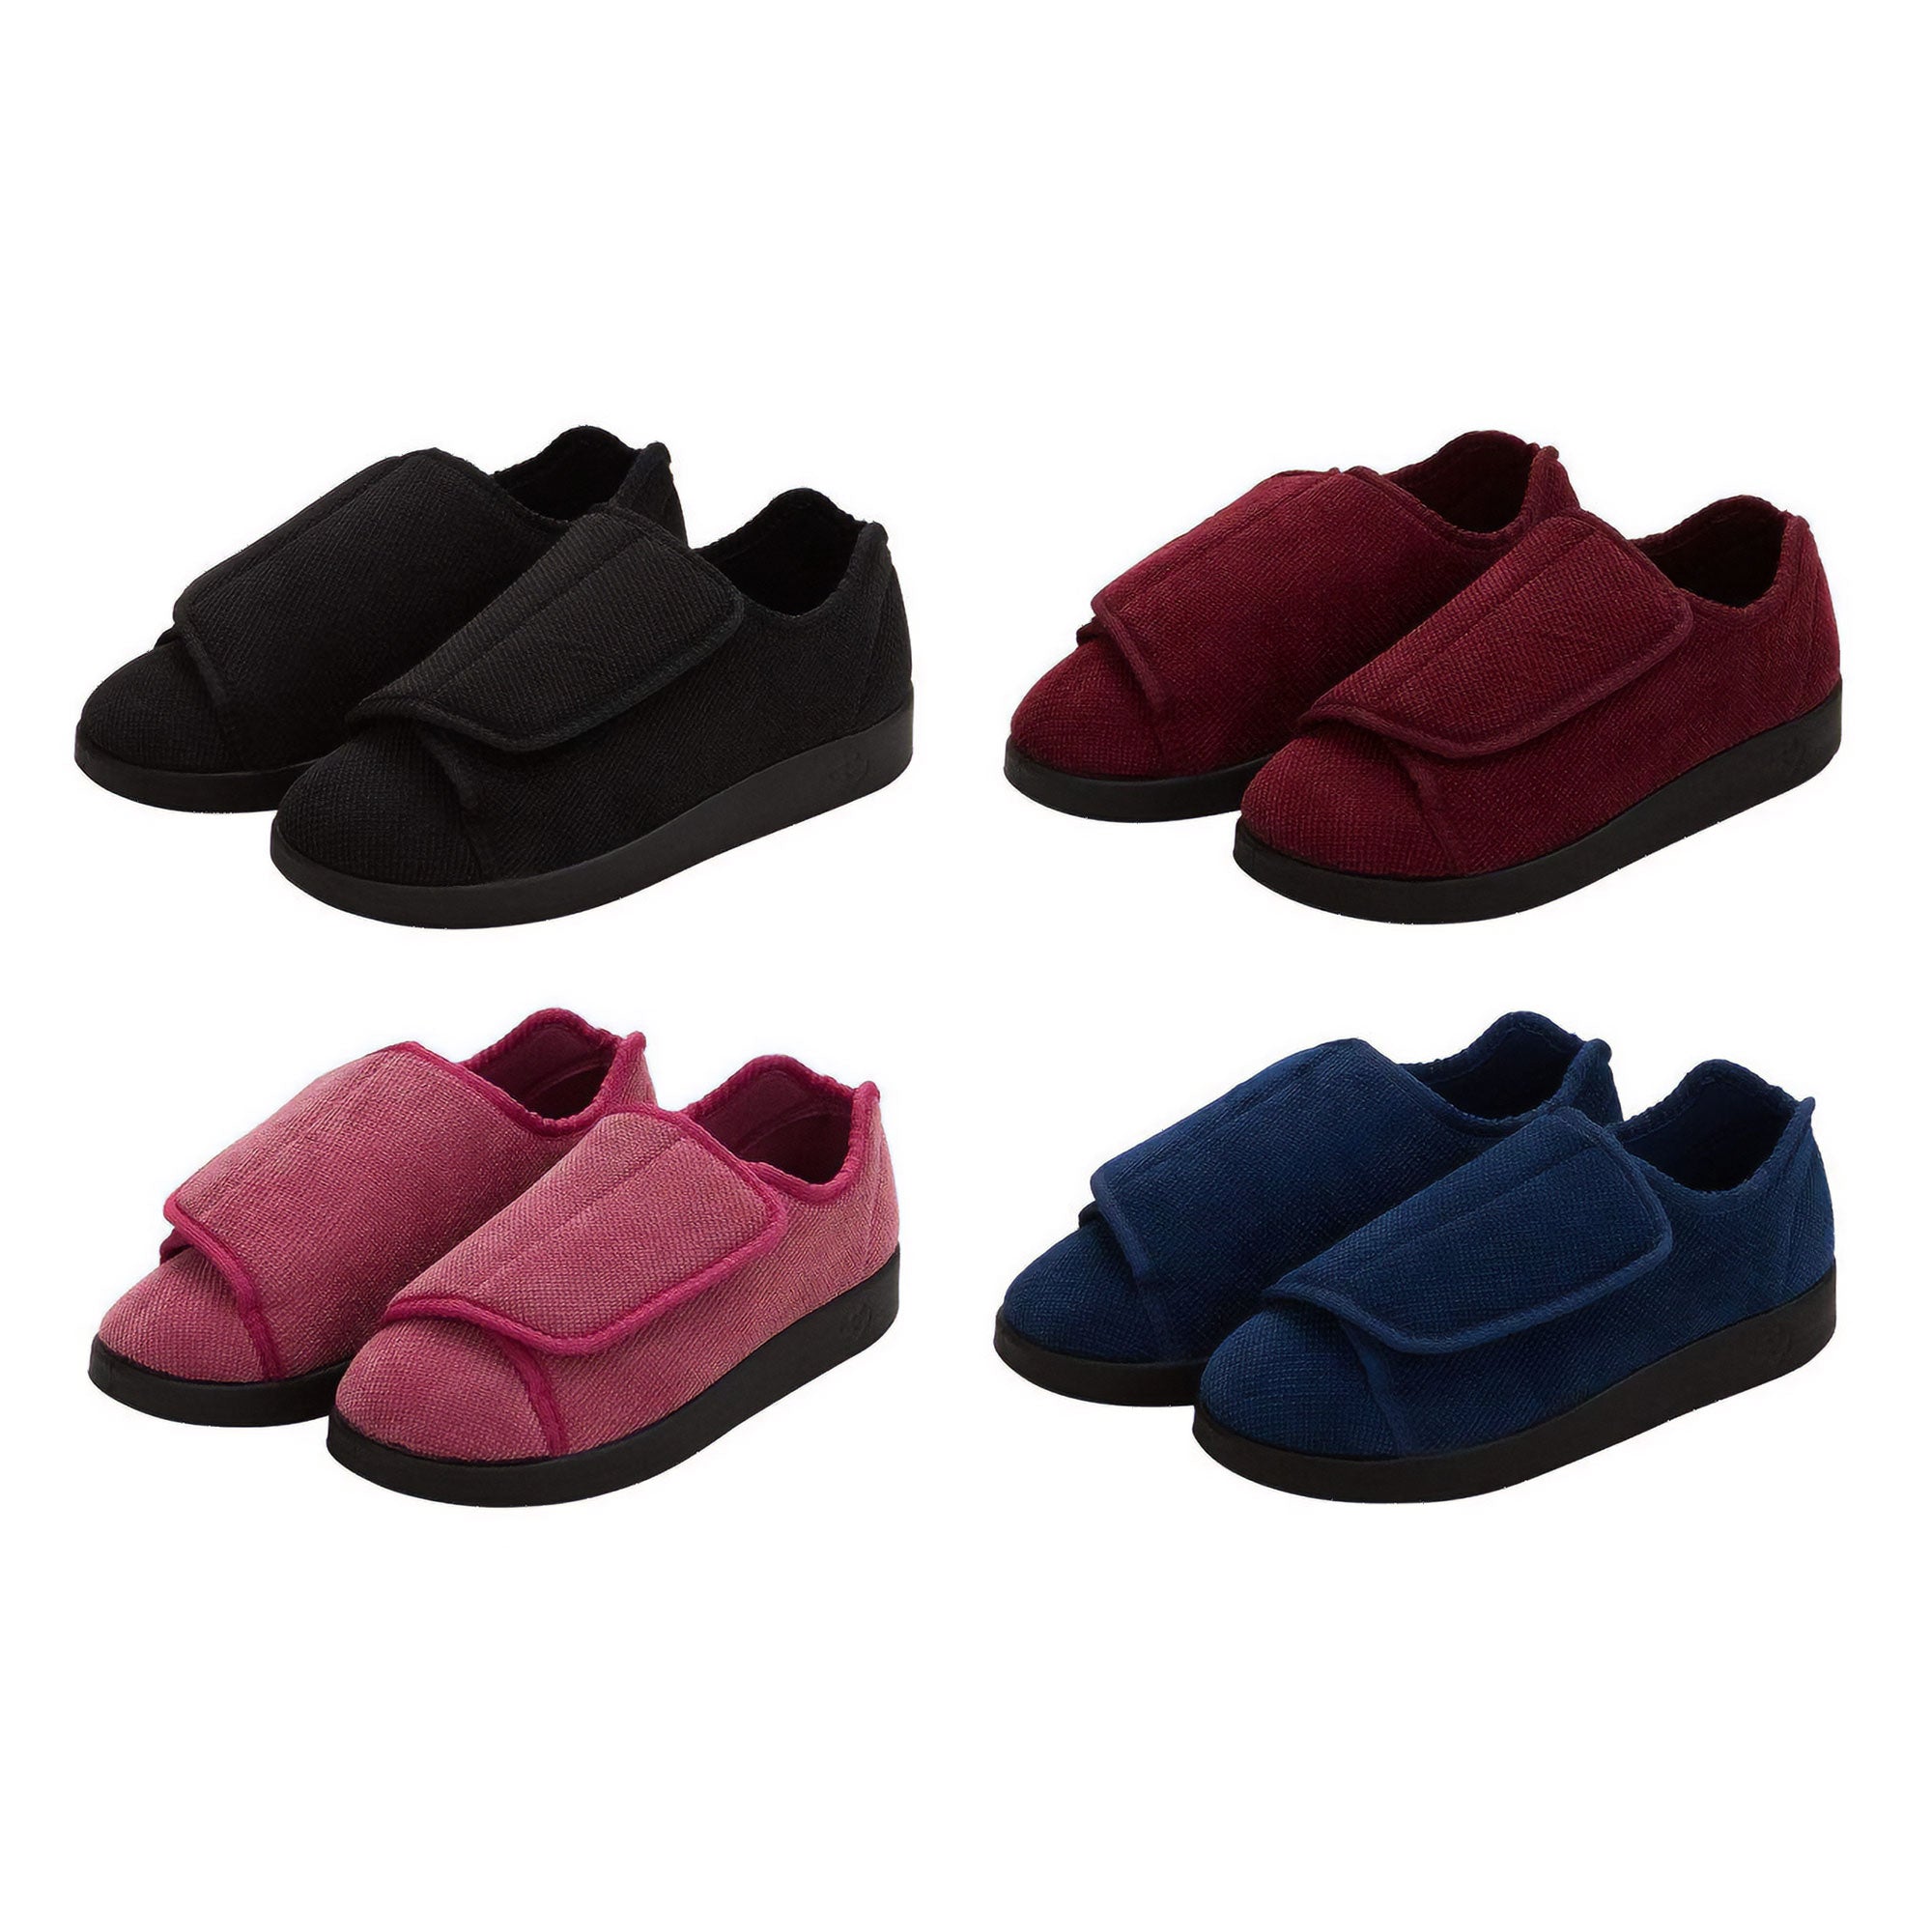 Silverts Women's Antimicrobial Extra Extra Wide Easy-Closure Slippers - Wine - 11